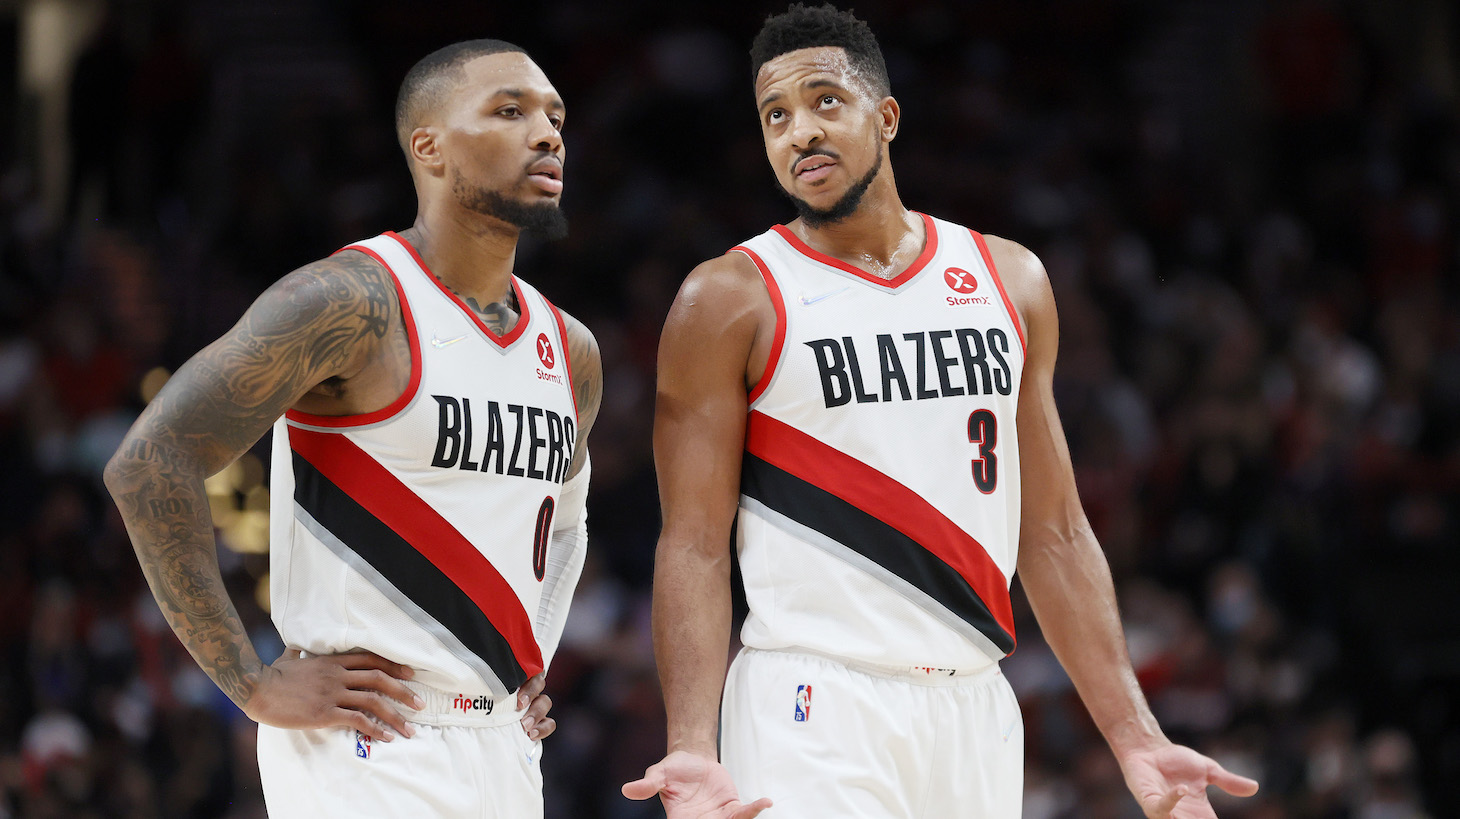 PORTLAND, OREGON - OCTOBER 20: Damian Lillard #0 and CJ McCollum #3 of the Portland Trail Blazers react during the fourth quarter against the Sacramento Kings at Moda Center on October 20, 2021 in Portland, Oregon. NOTE TO USER: User expressly acknowledges and agrees that, by downloading and or using this photograph, User is consenting to the terms and conditions of the Getty Images License Agreement. (Photo by Steph Chambers/Getty Images)